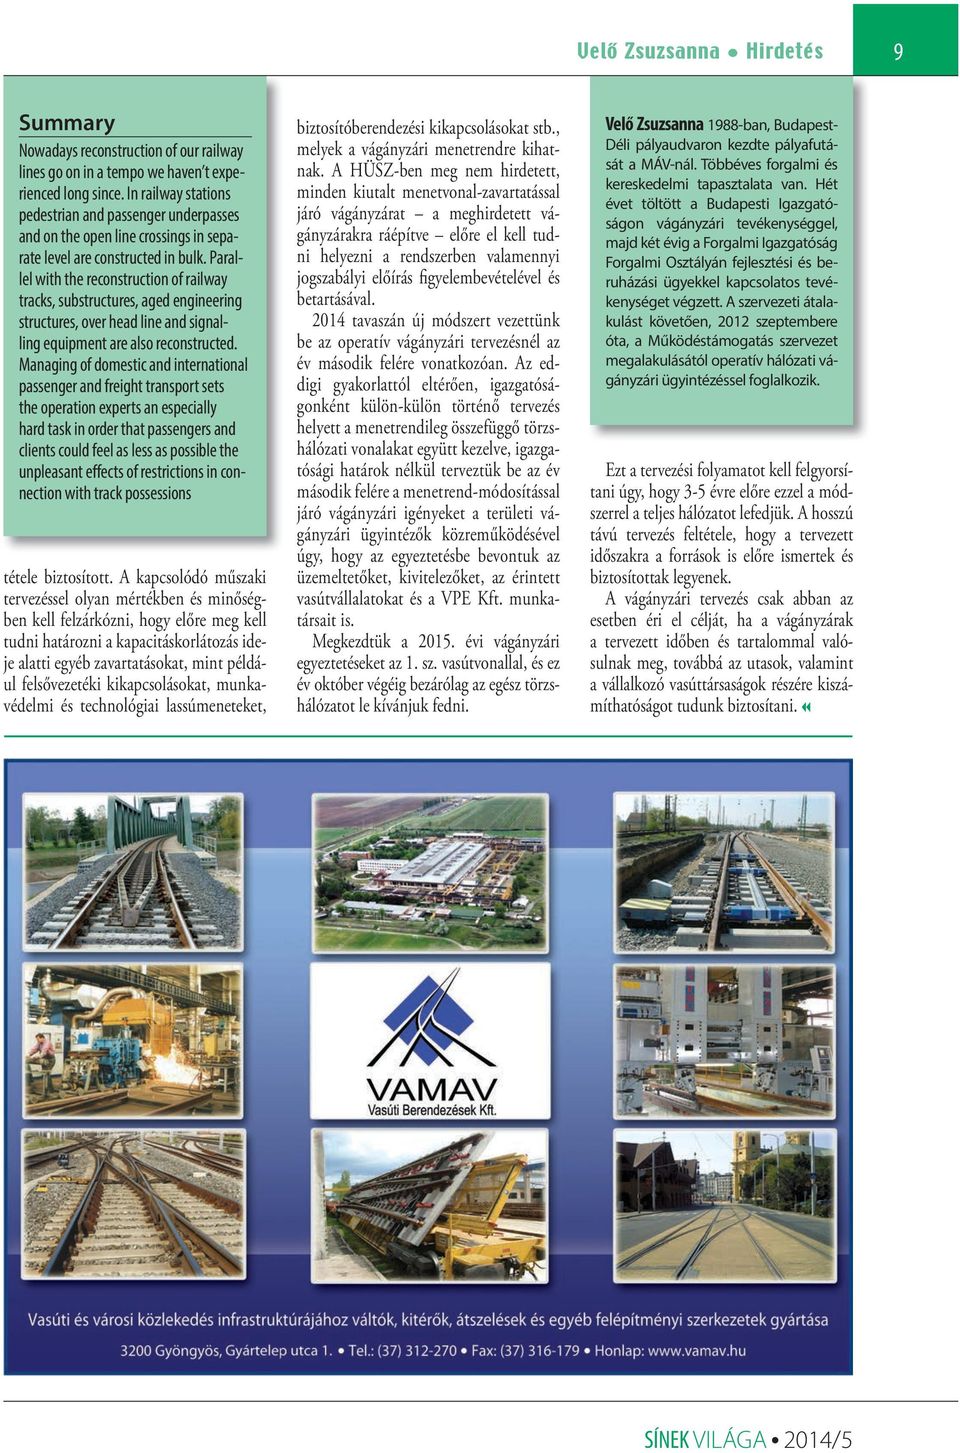 Parallel with the reconstruction of railway tracks, substructures, aged engineering structures, over head line and signalling equipment are also reconstructed.